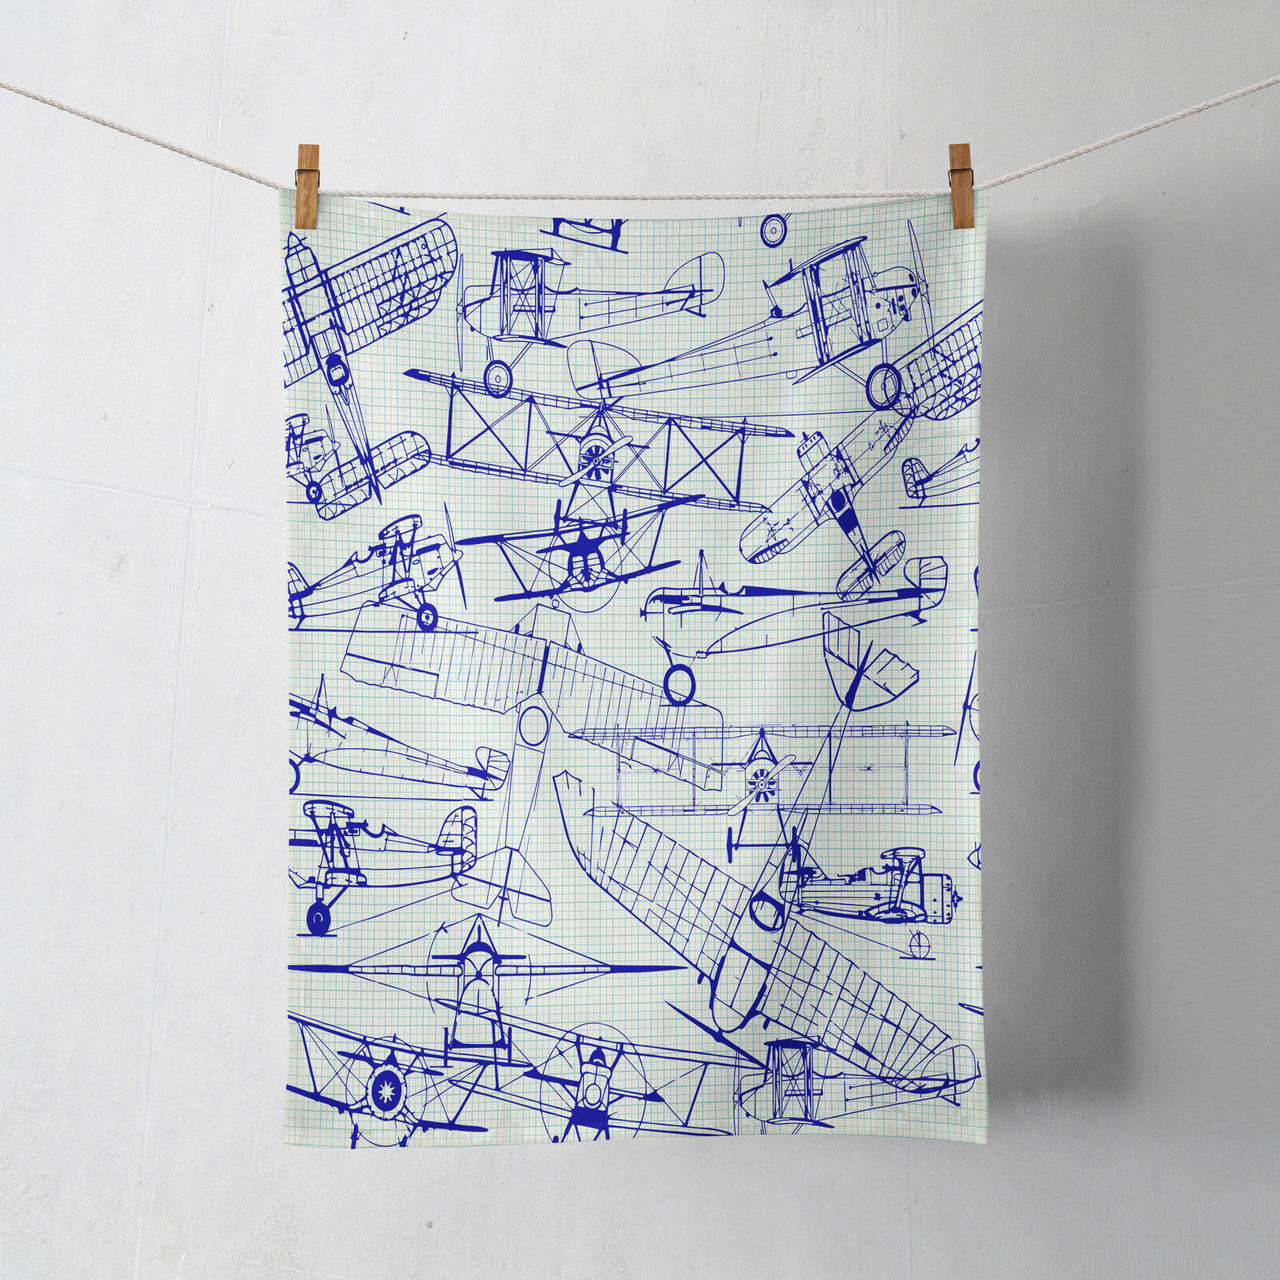 Amazing Drawings of Old Aircrafts Designed Towels